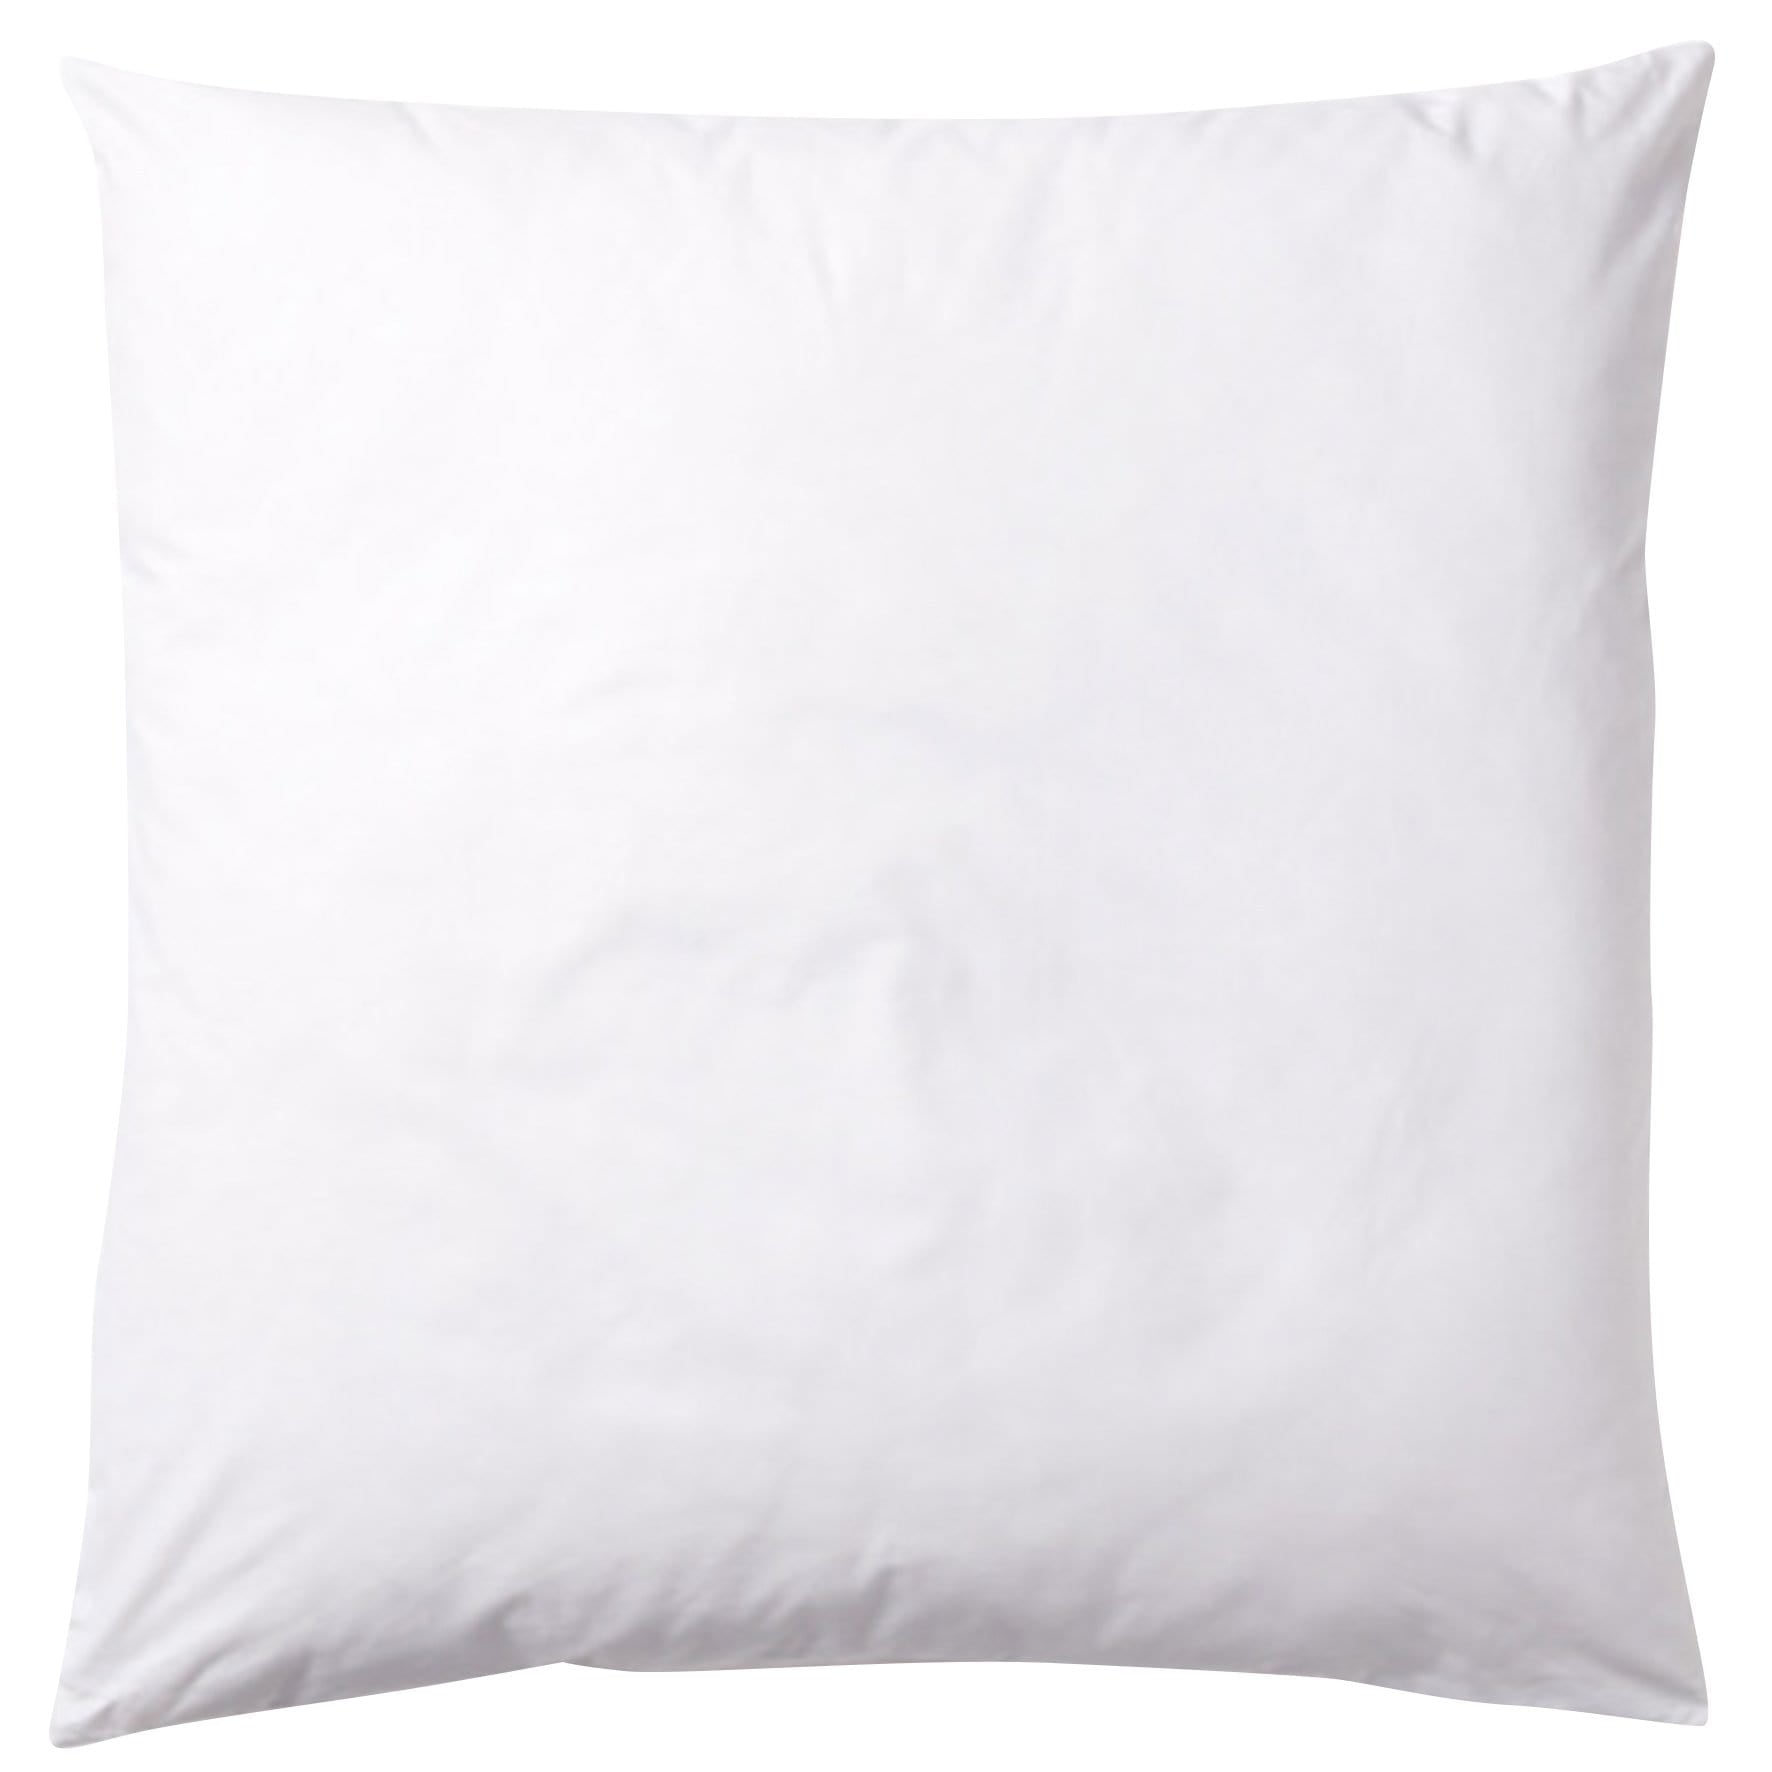 70x70 Feather Cushion Inner to fit a 65x65 Cushion Cover